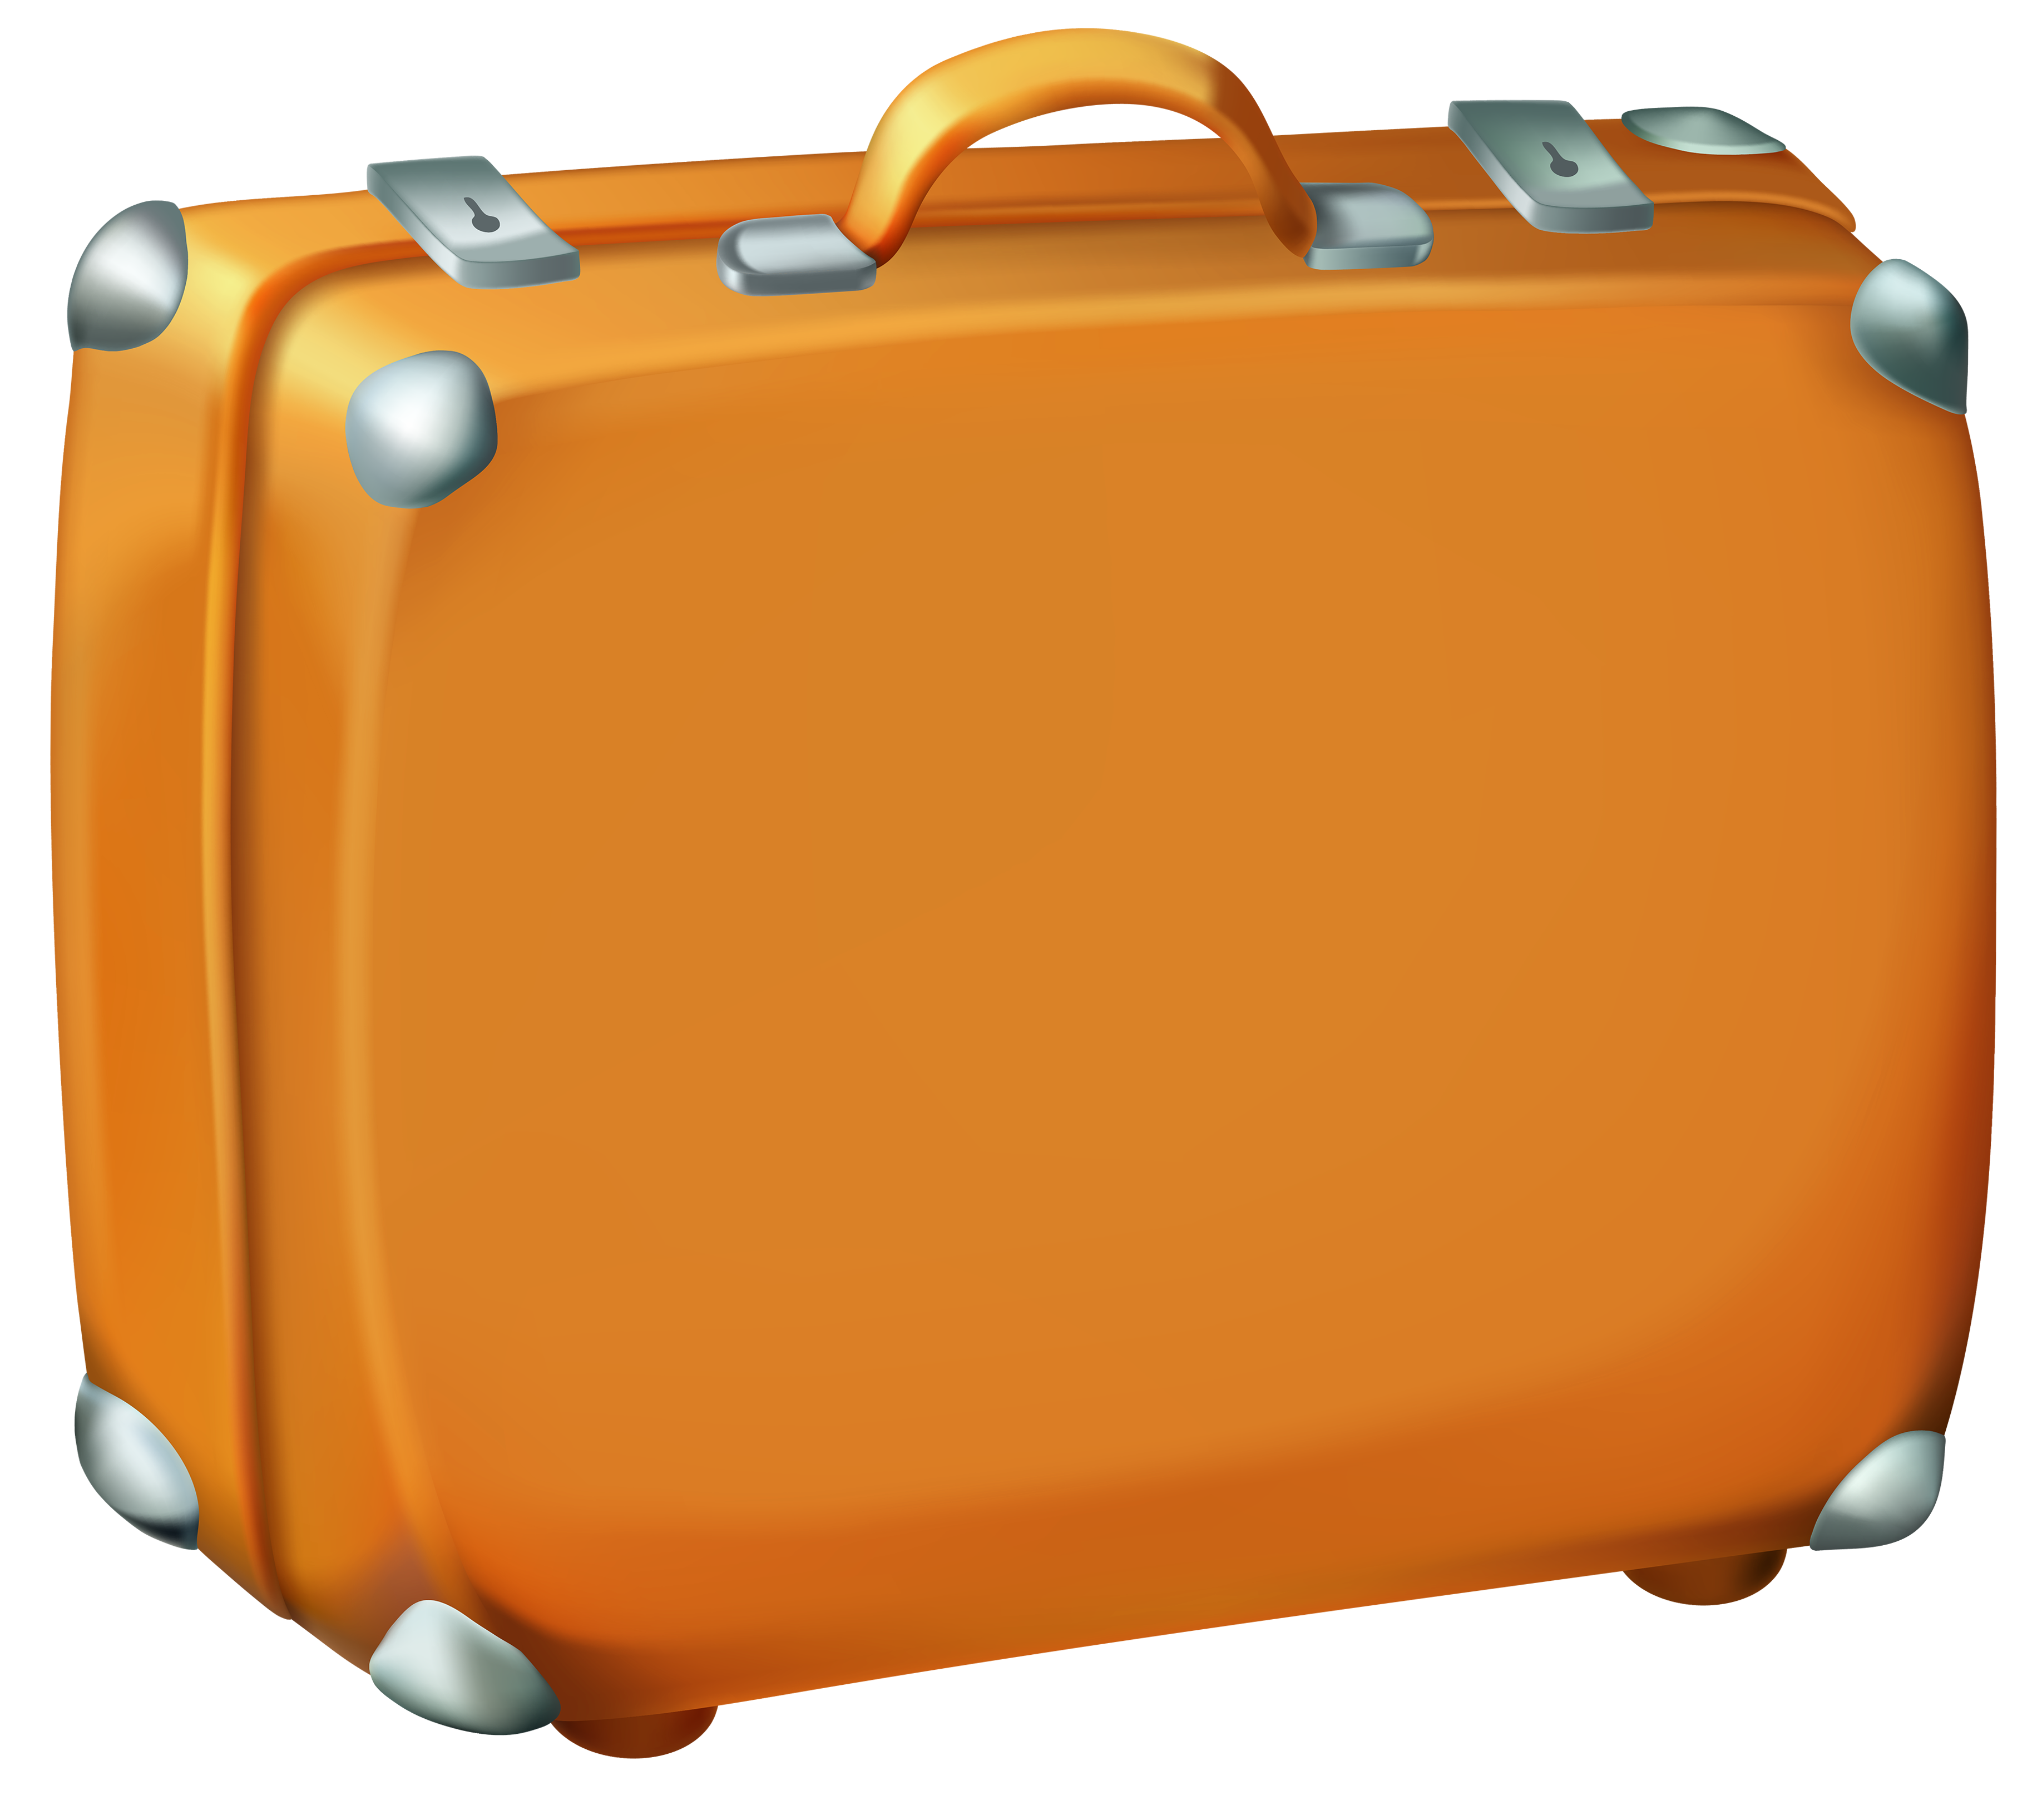 Brown suitcase clipart.